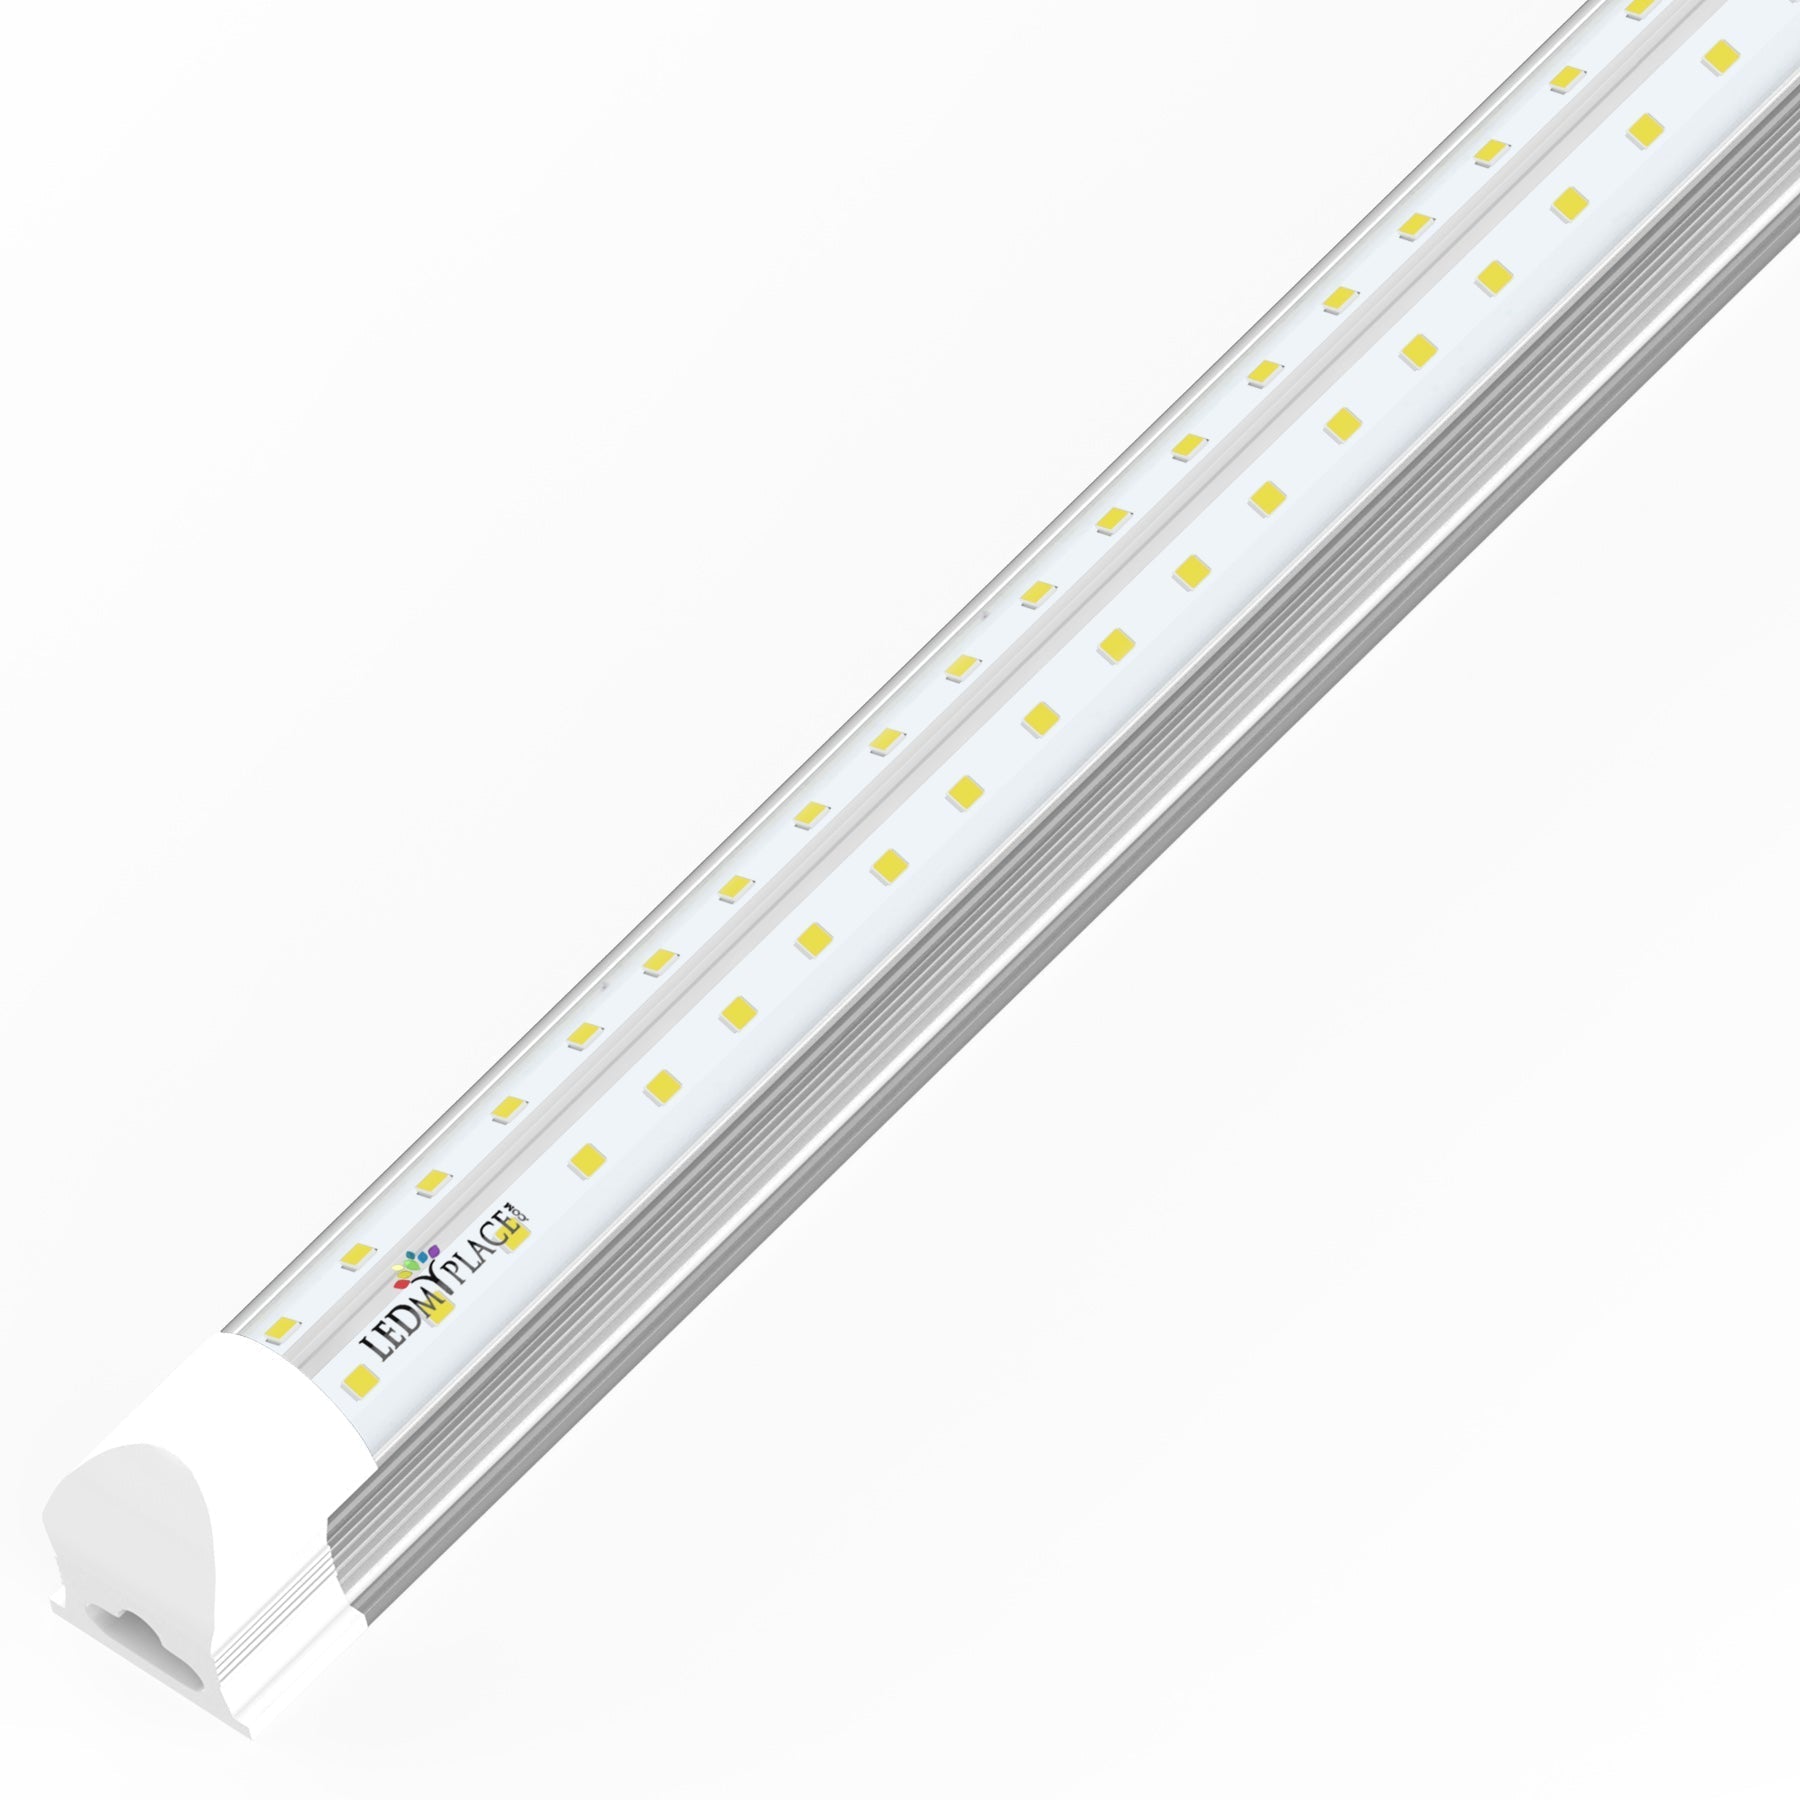 22W Integrated LED Tube Light - 4ft V Shape - 6500k Clear Cover - Works without T8 Ballast